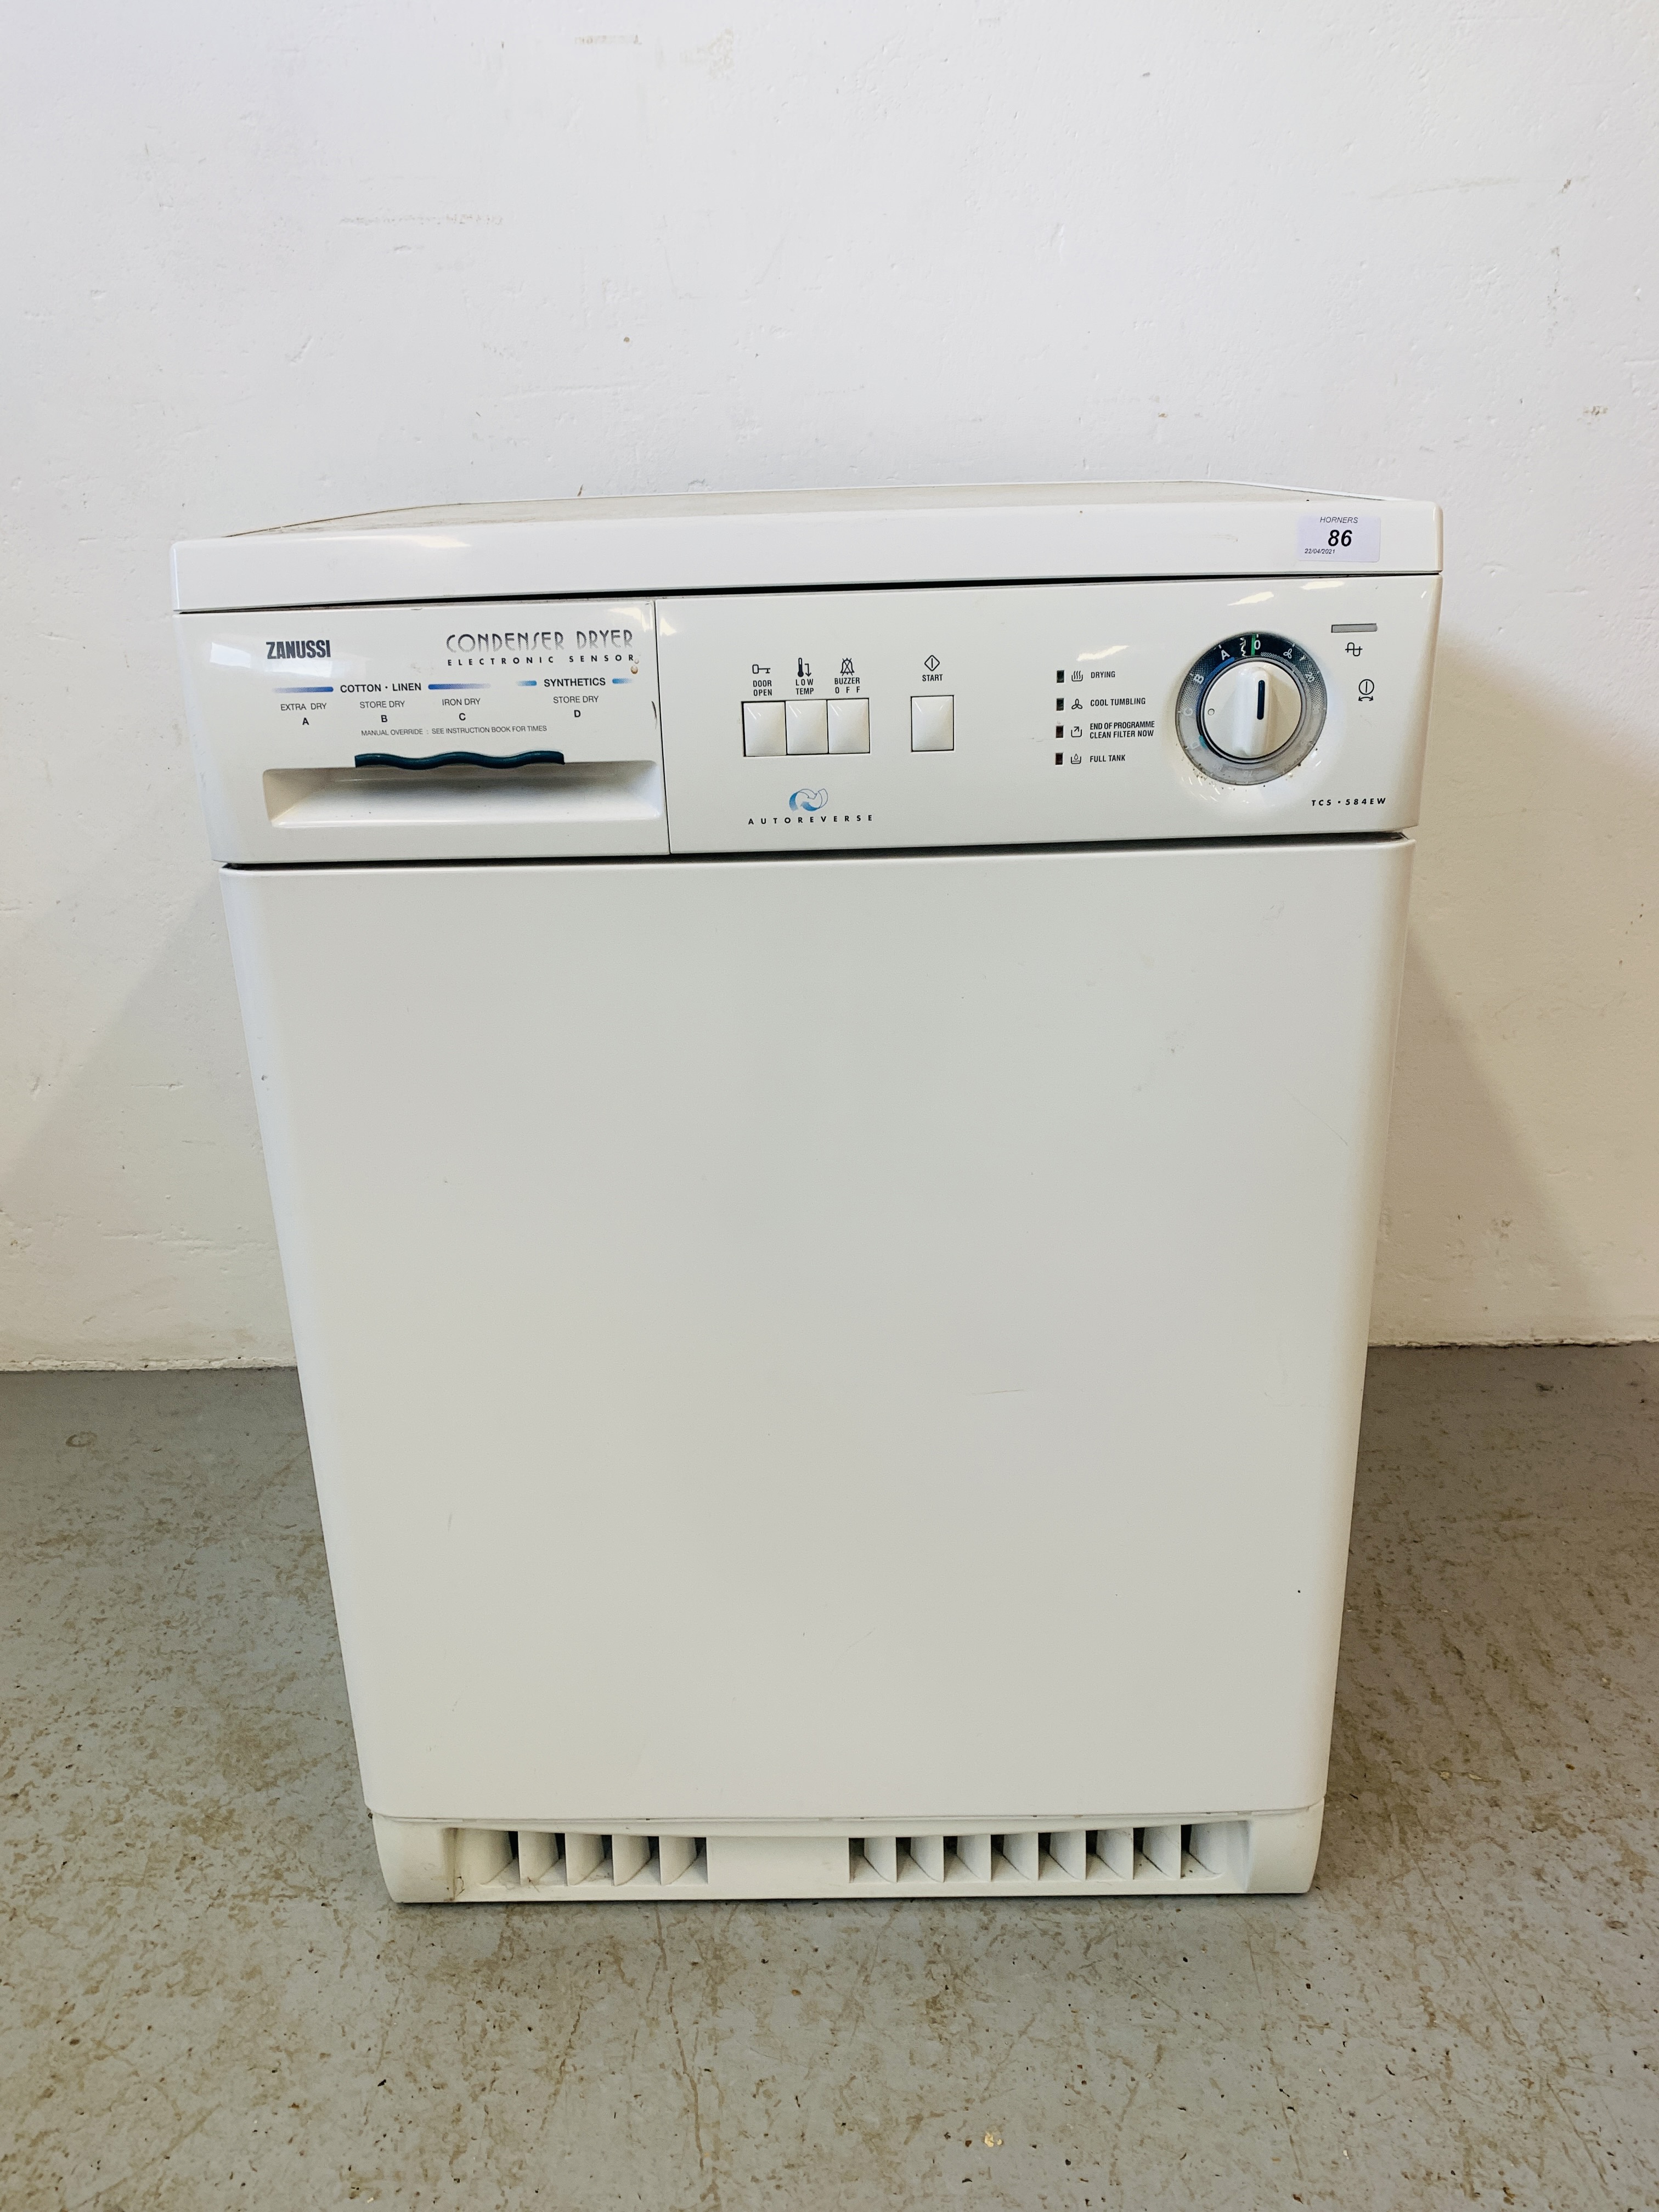 A ZANUSSI CONDENSER TUMBLE DRYER - SOLD AS SEEN